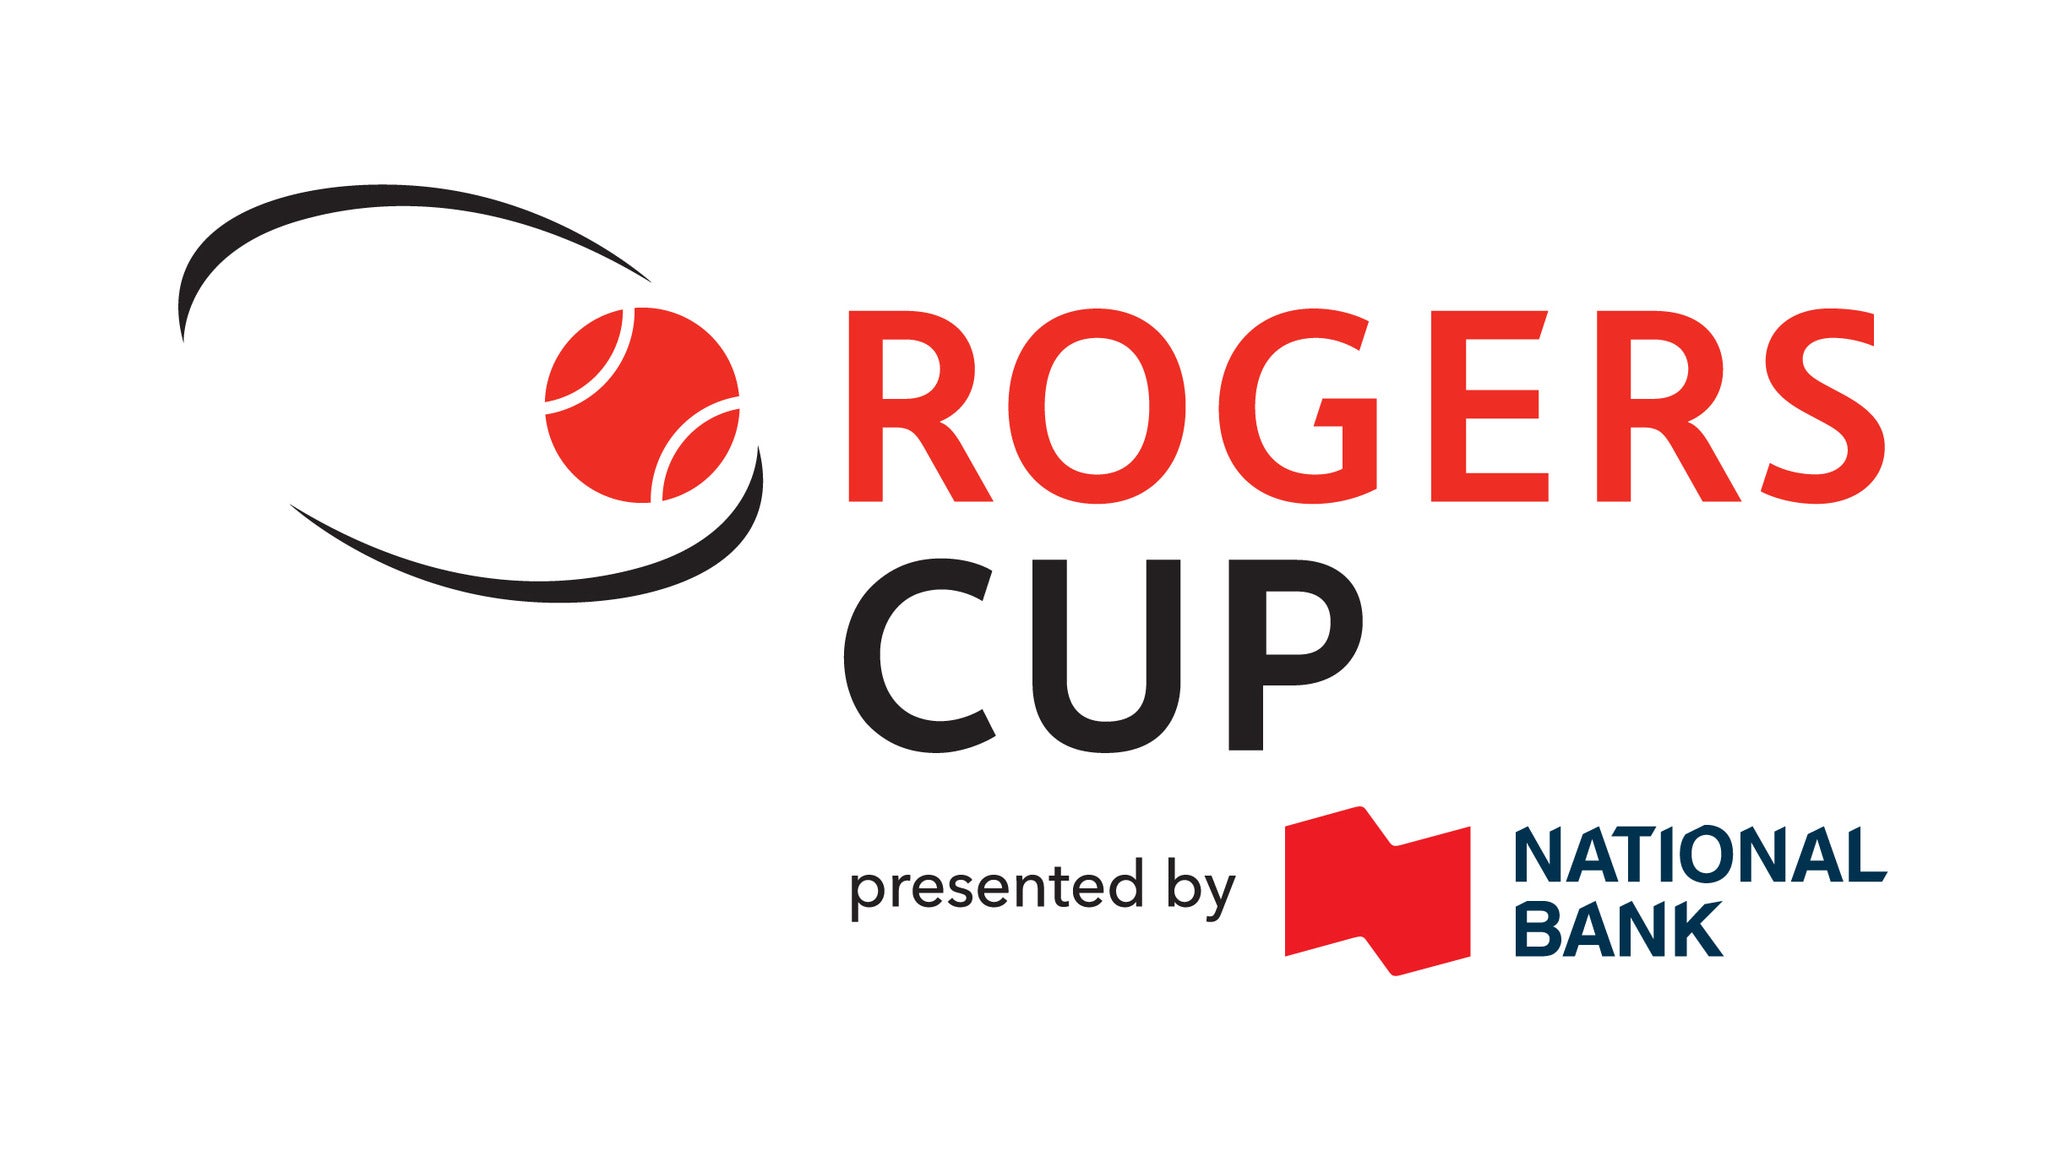 Rogers Cup (Toronto - WTA Women's Tennis) 1ST ROUND in Toronto promo photo for Special  presale offer code